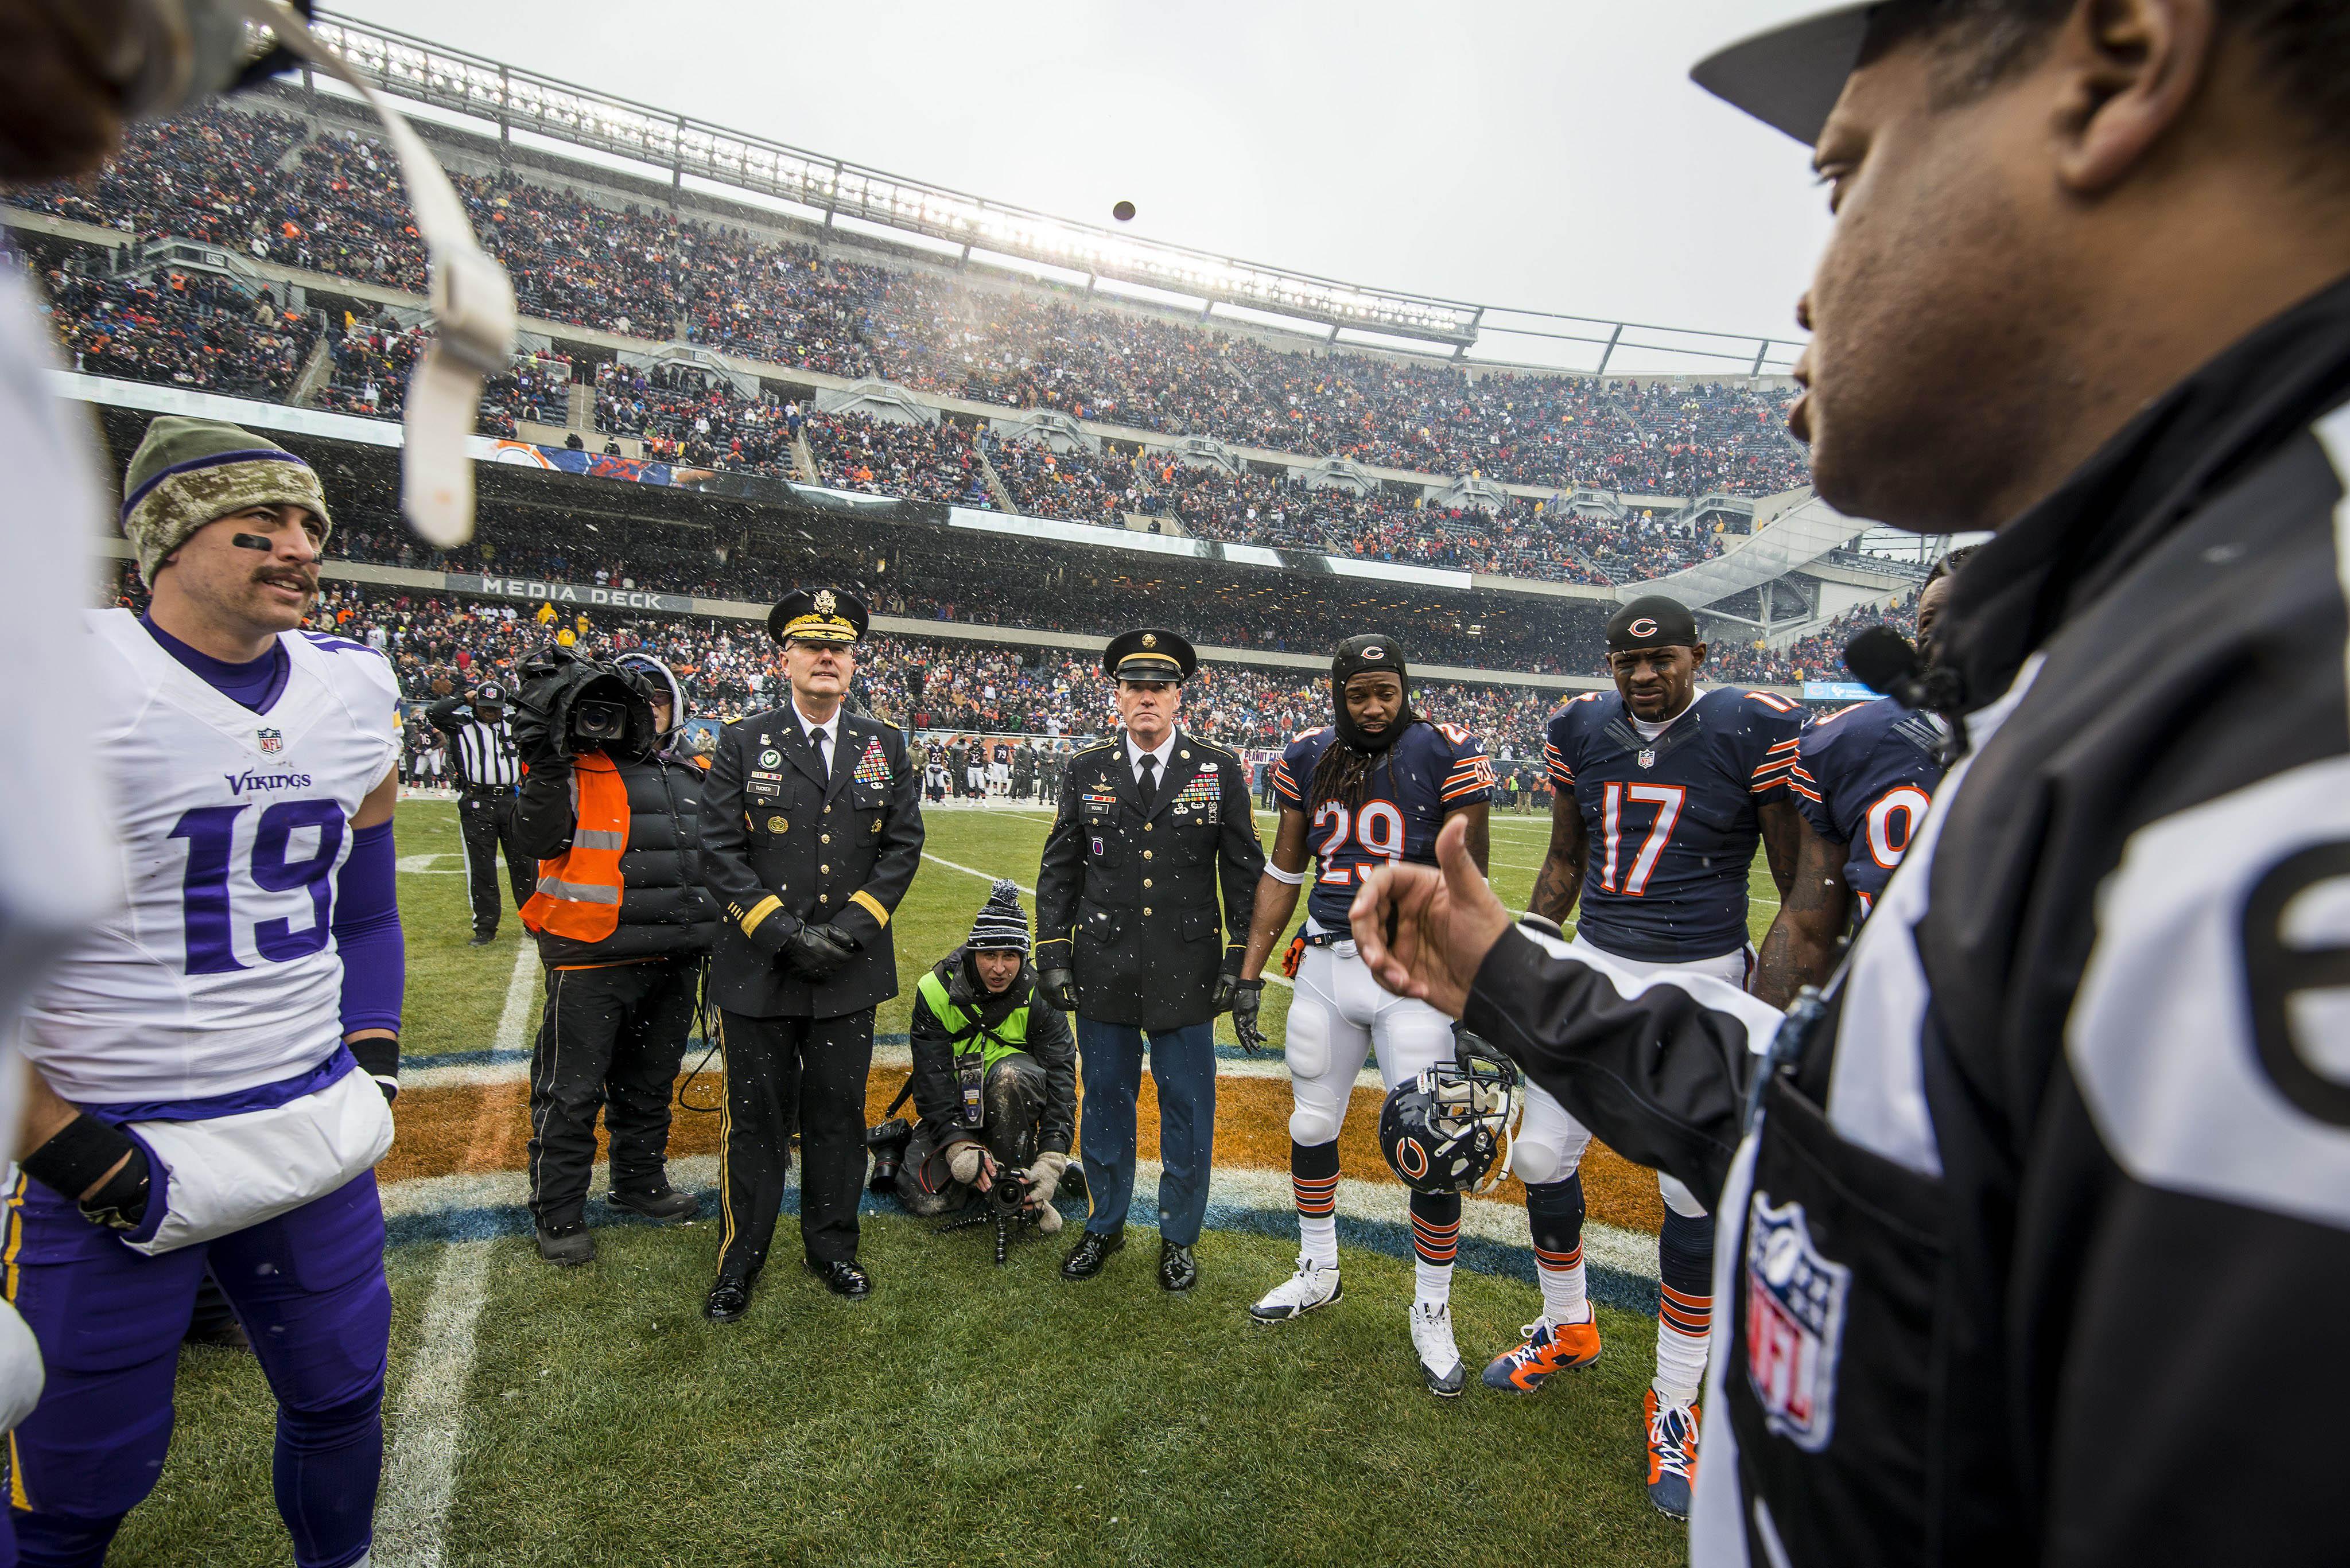 U.S. Army officers oversee a coin toss on Nov. 16, 2014 between the Chicago Bears and Minnesota Vikings at Soldier Field. (U.S. Army photo by Sgt. 1st Class Michel Sauret)